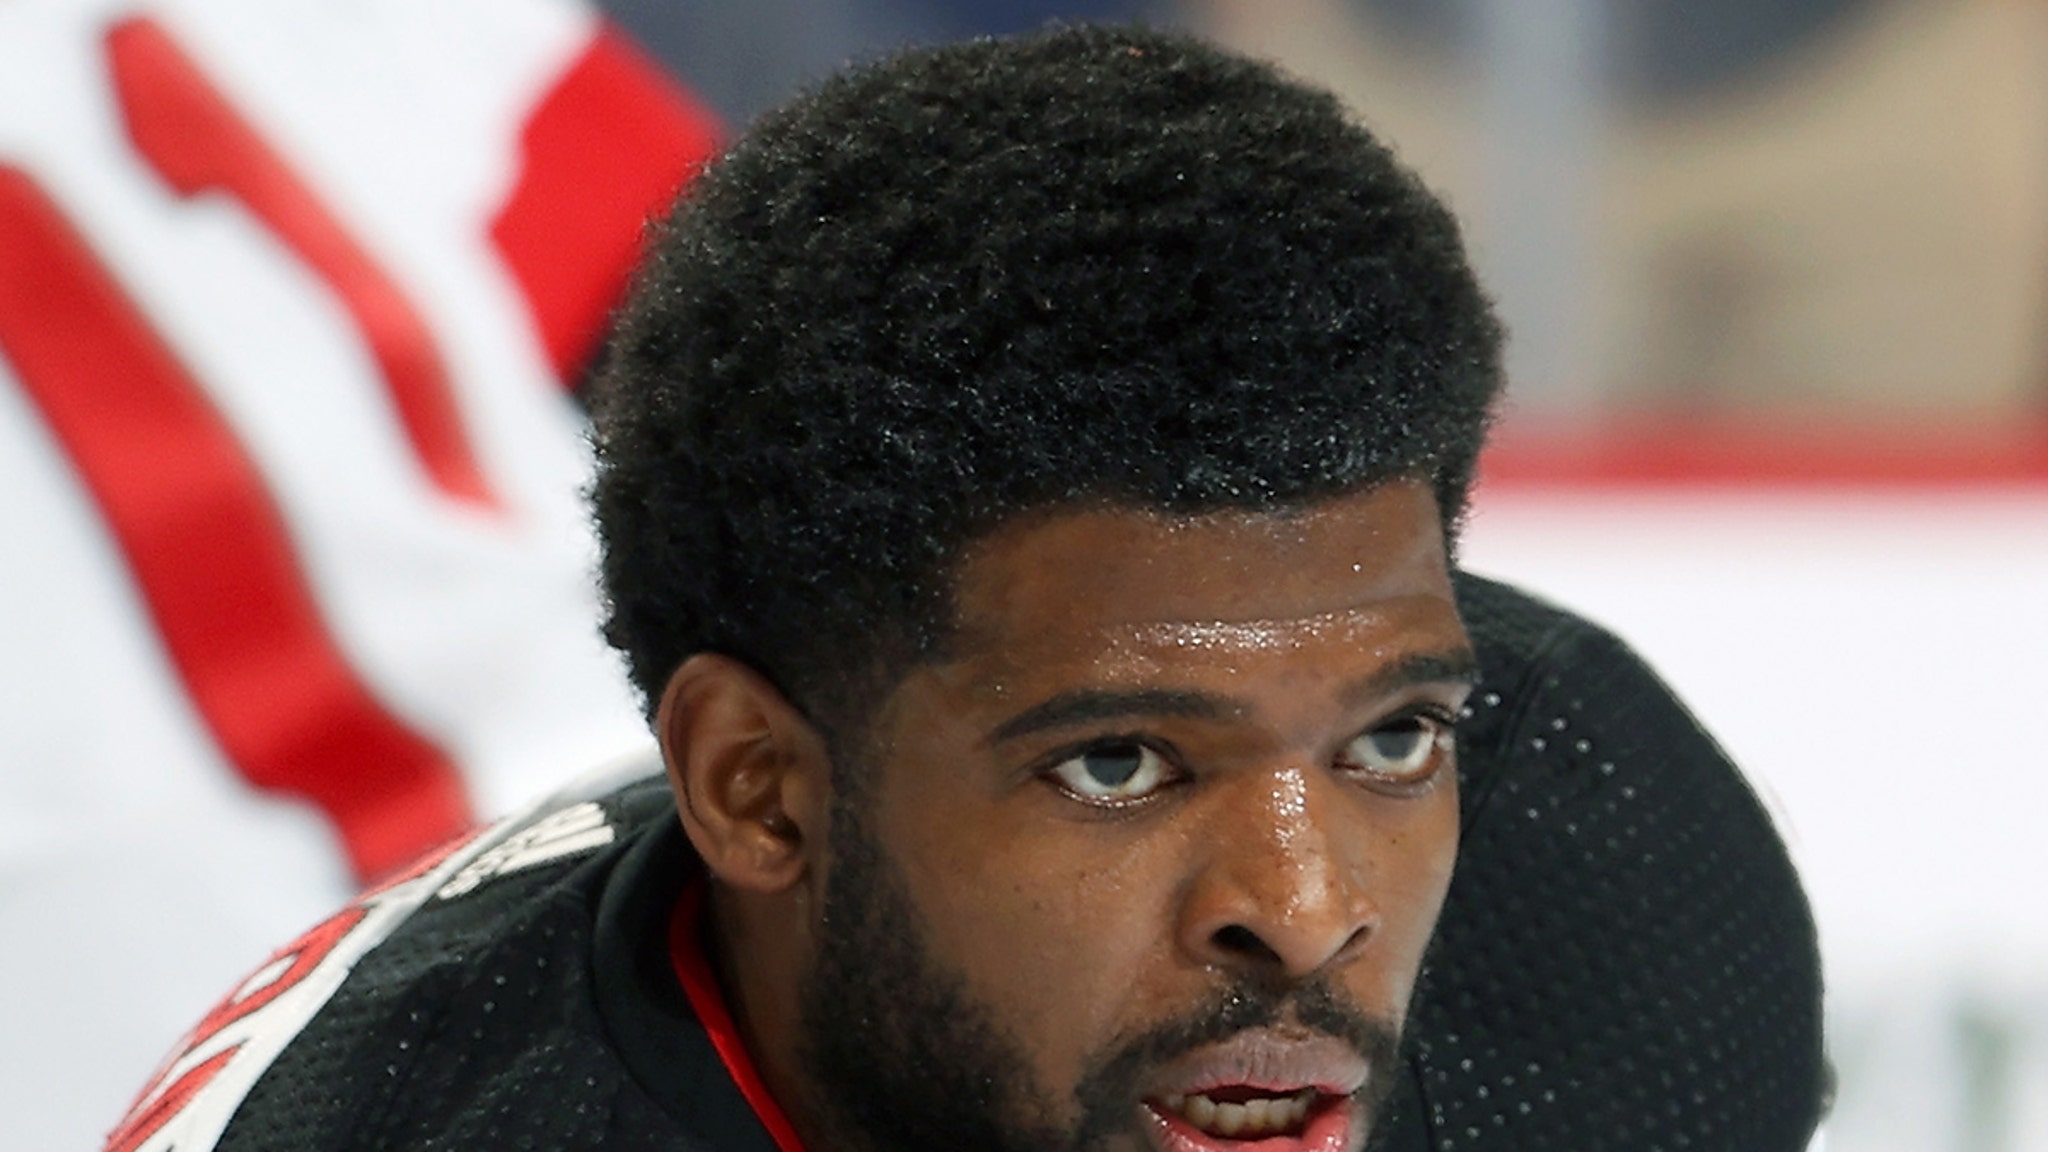 NHL Star P.K. Subban Retires After 13 Seasons, 'End Of This Chapter'